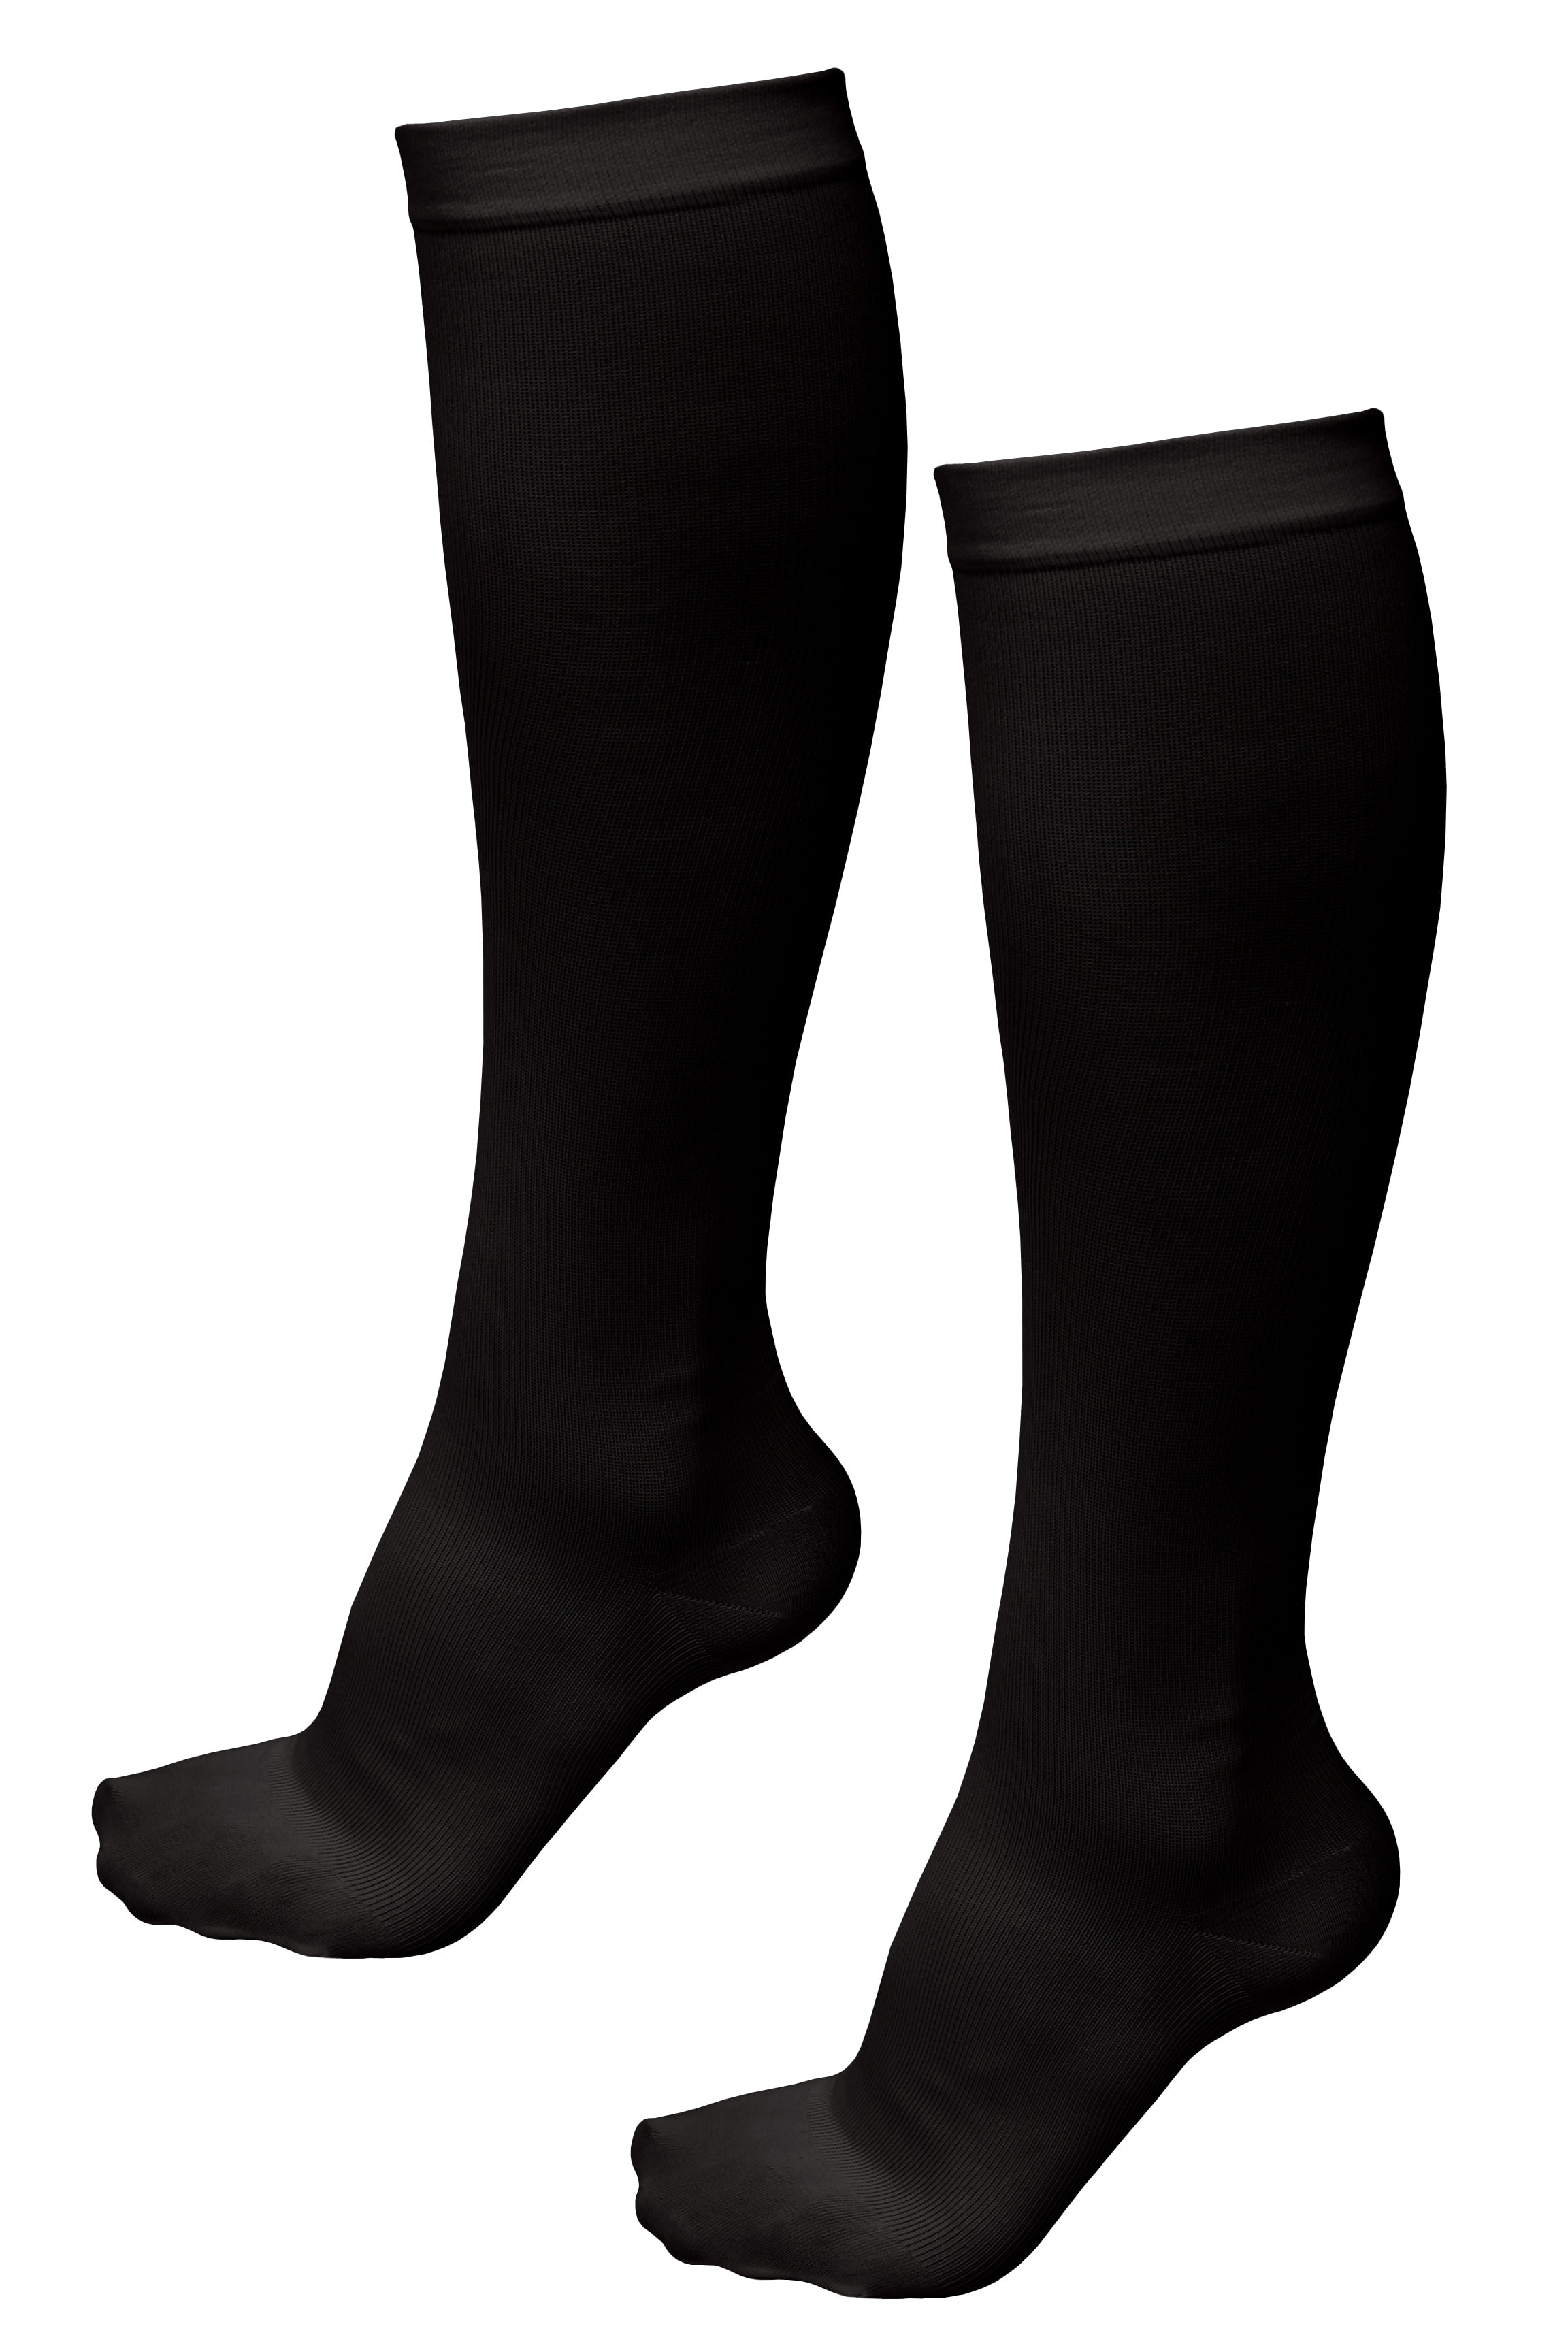 ANGEL KT Compression Copper Socks Miracle Foot Pain Relief 1 Pair Sm/Med Black 